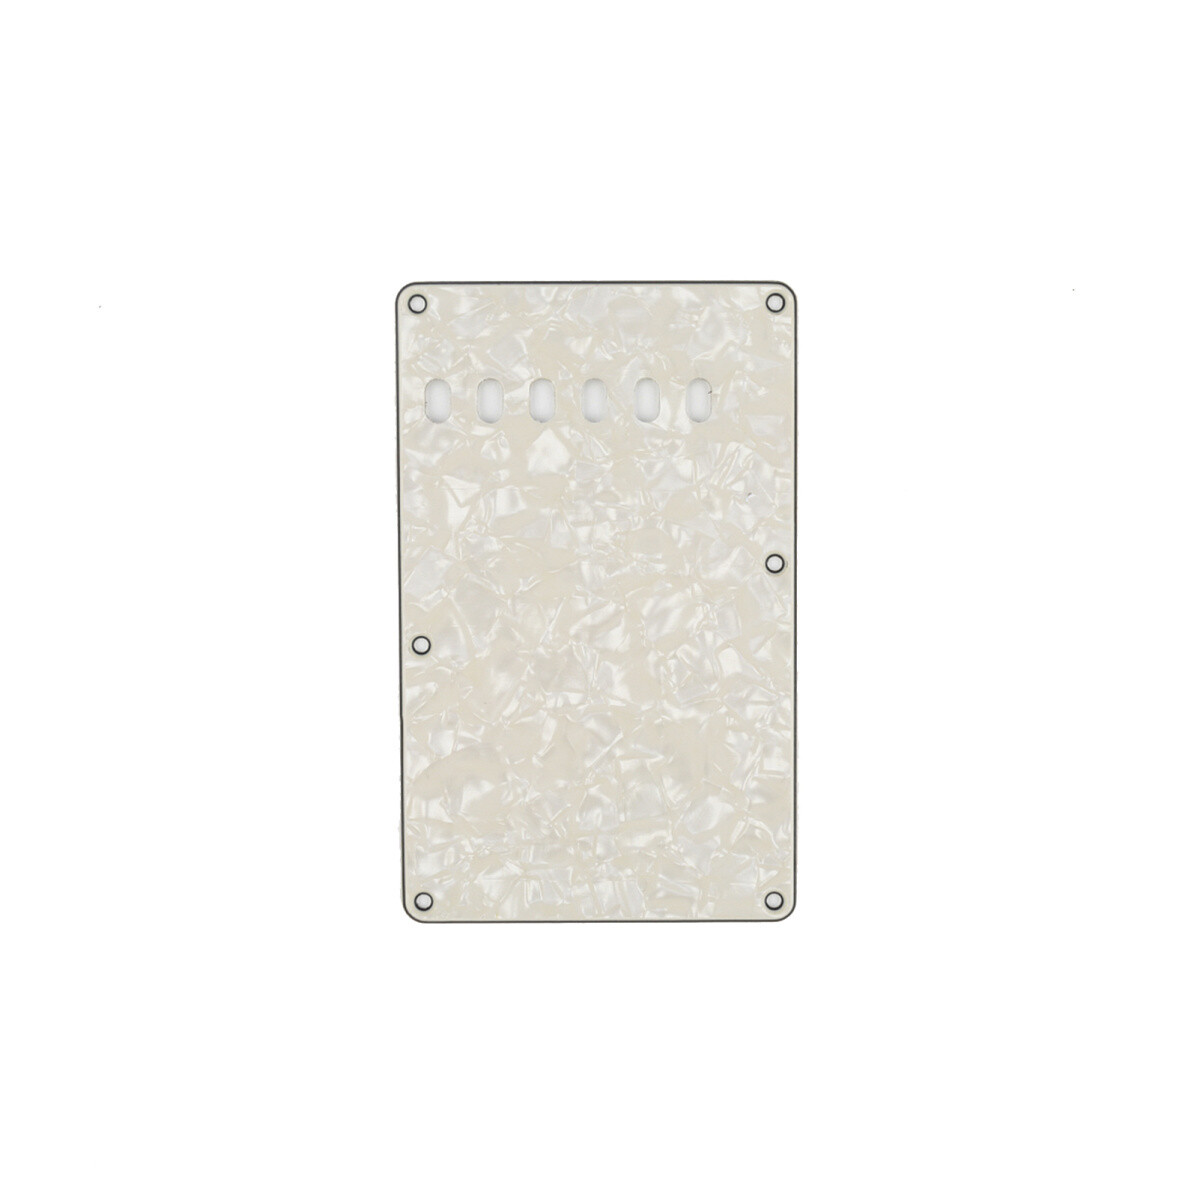 Brio Aged White Pearl Vintage Style Back Plate Tremolo Cover 4 ply - US/Mexican Fender®Strat® Fit